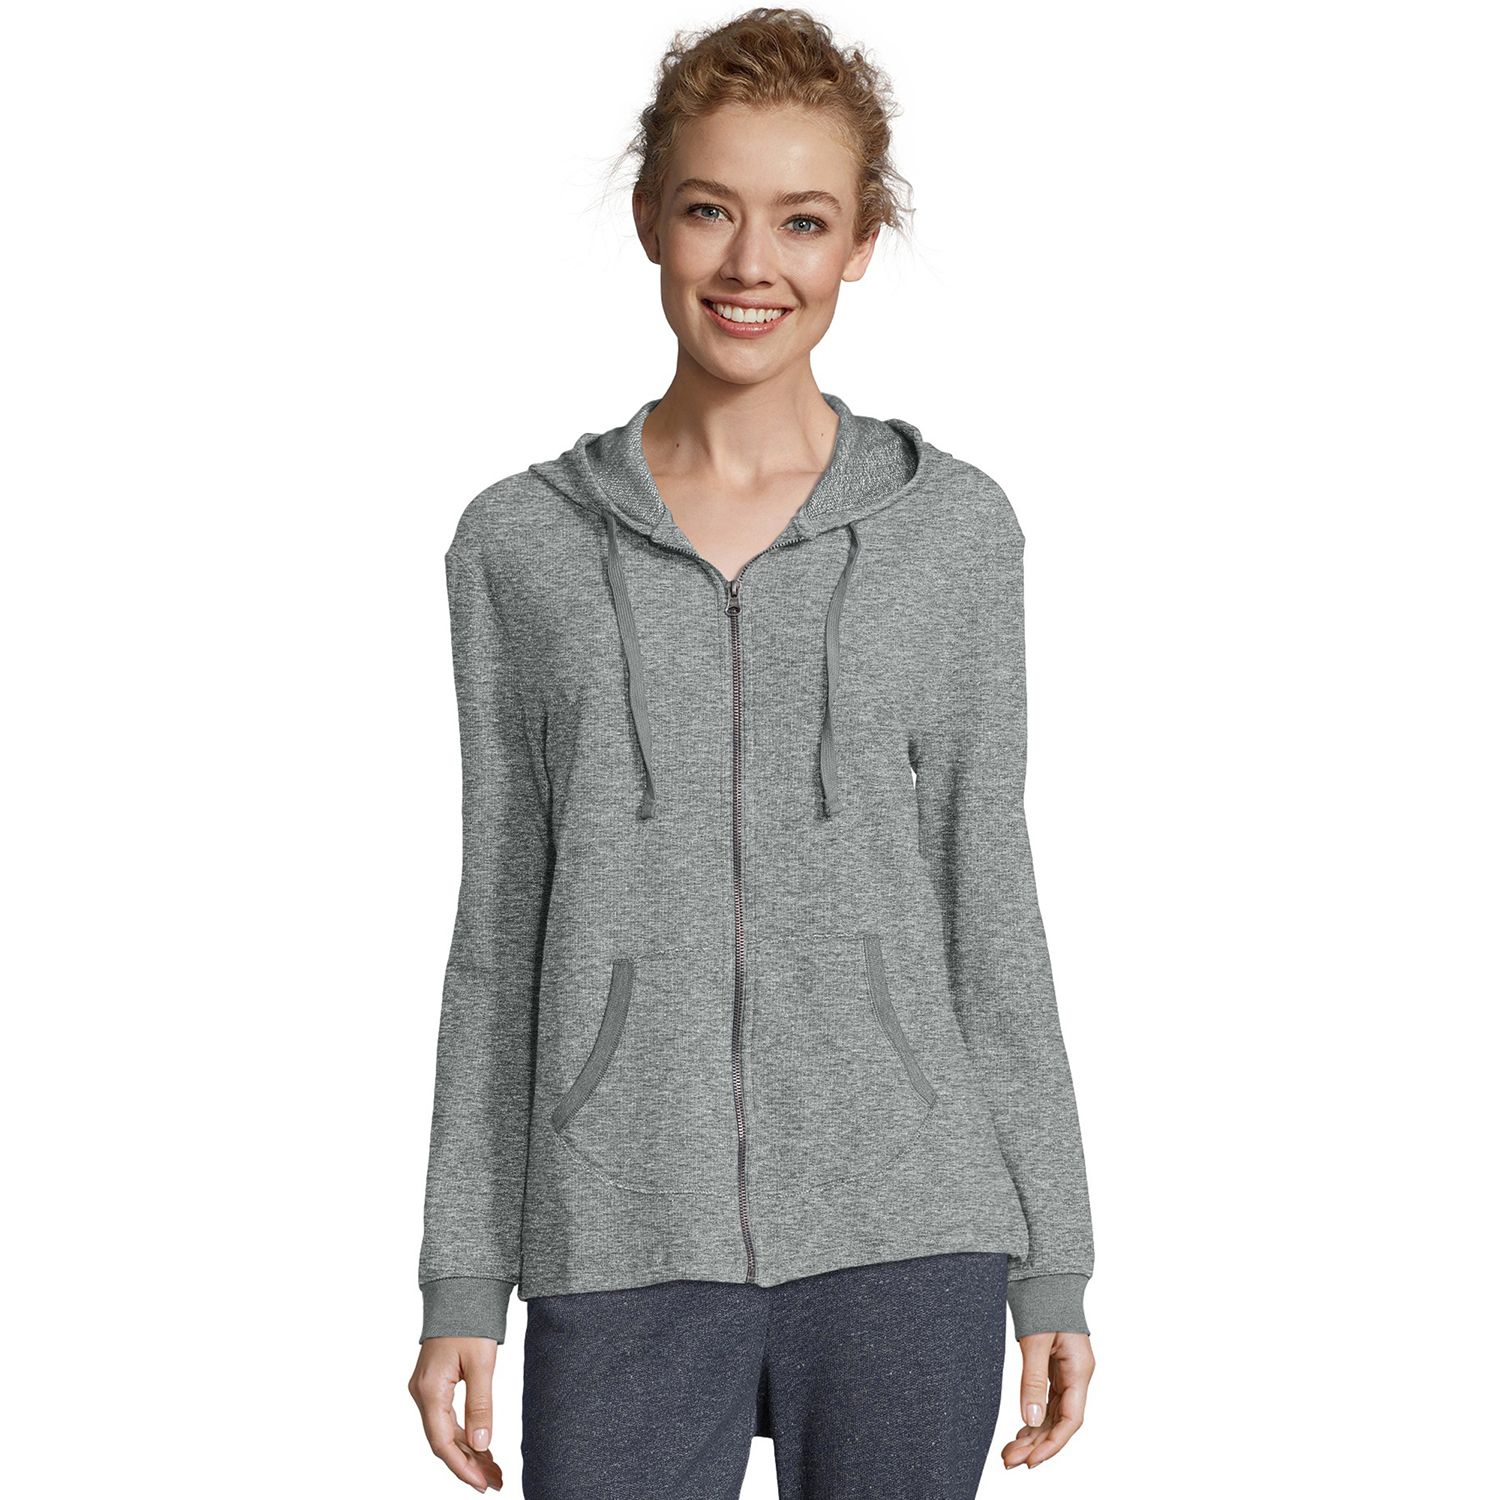 Image for Hanes Women's French Terry Zip-Up Hoodie at Kohl's.